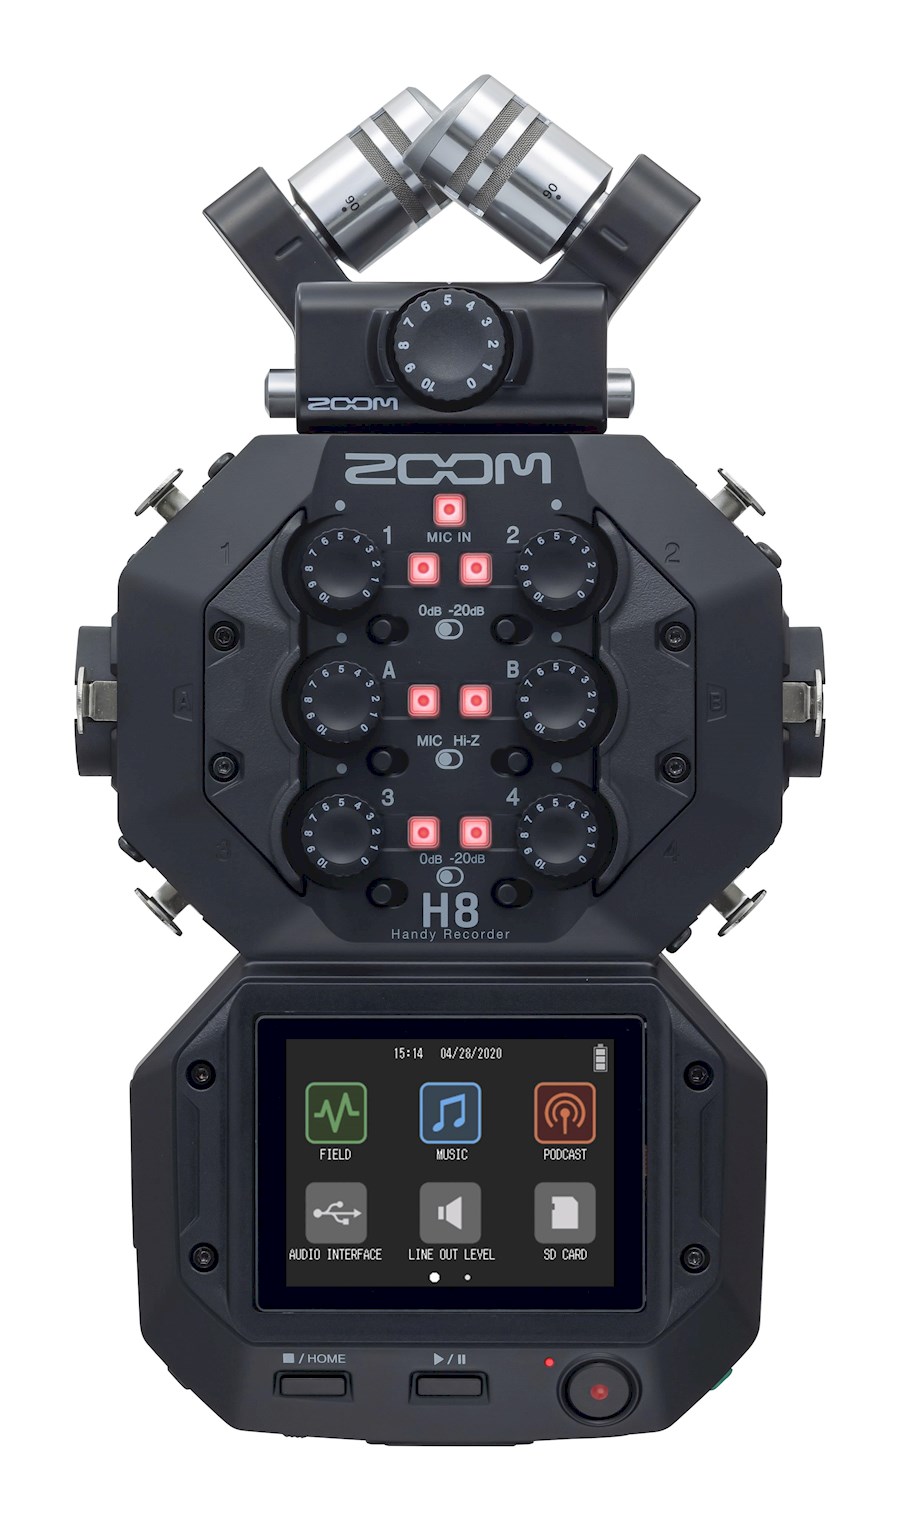 Rent Zoom H8 Handy Recorder from Timo